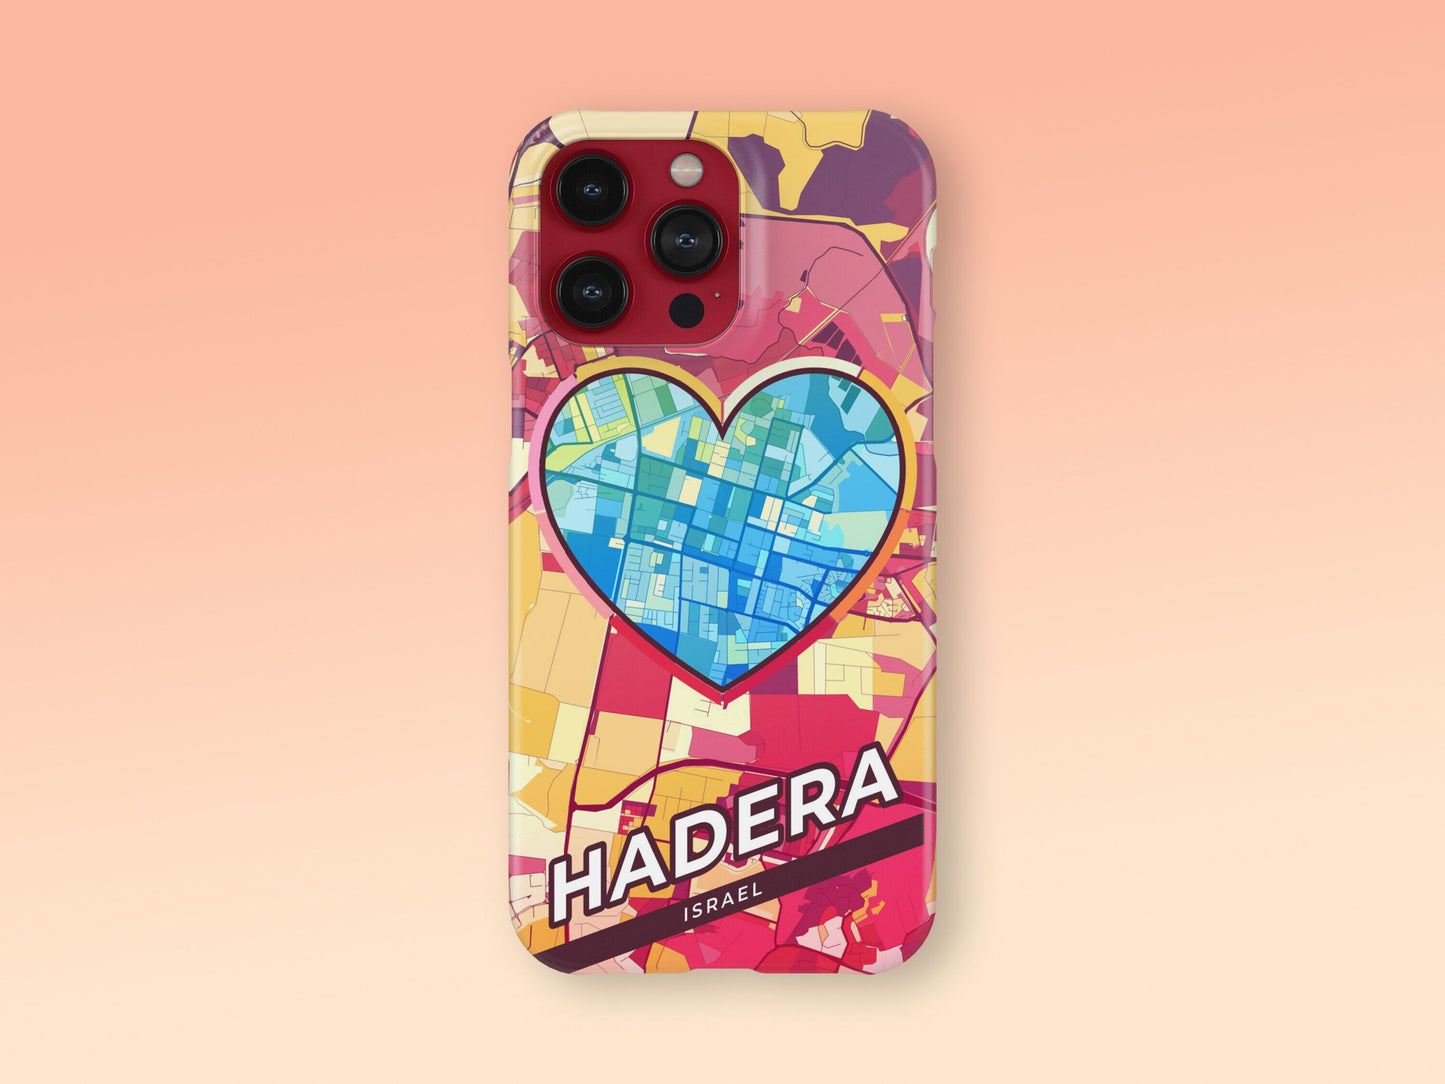 Hadera Israel slim phone case with colorful icon. Birthday, wedding or housewarming gift. Couple match cases. 2